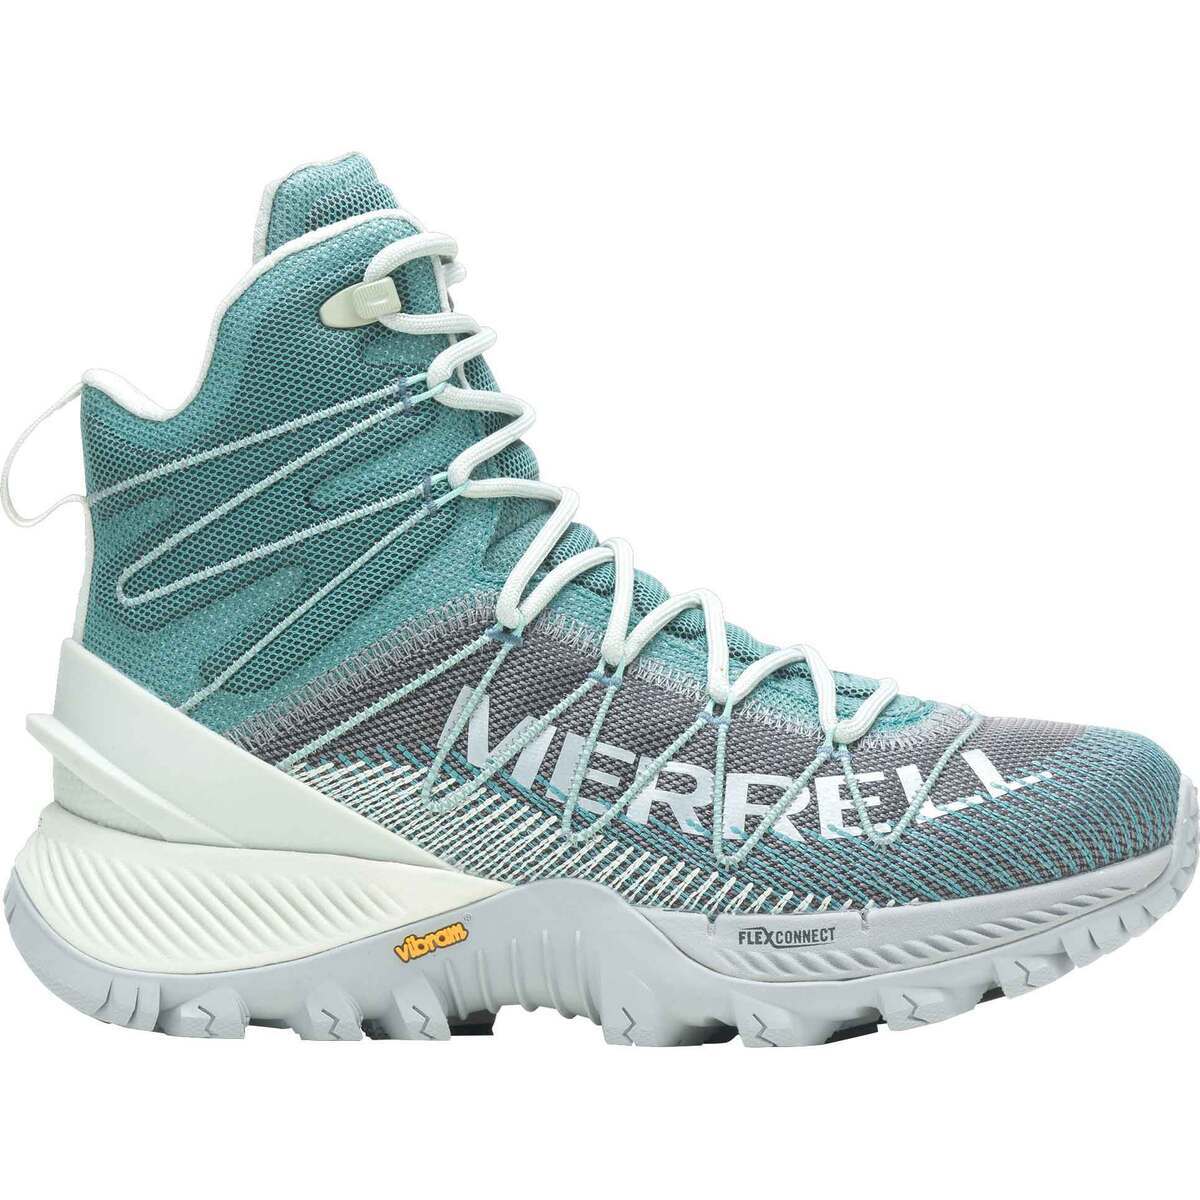 Merrell Women's Thermo Rogue 3 Waterproof Mid Hiking Boots | Sportsman ...